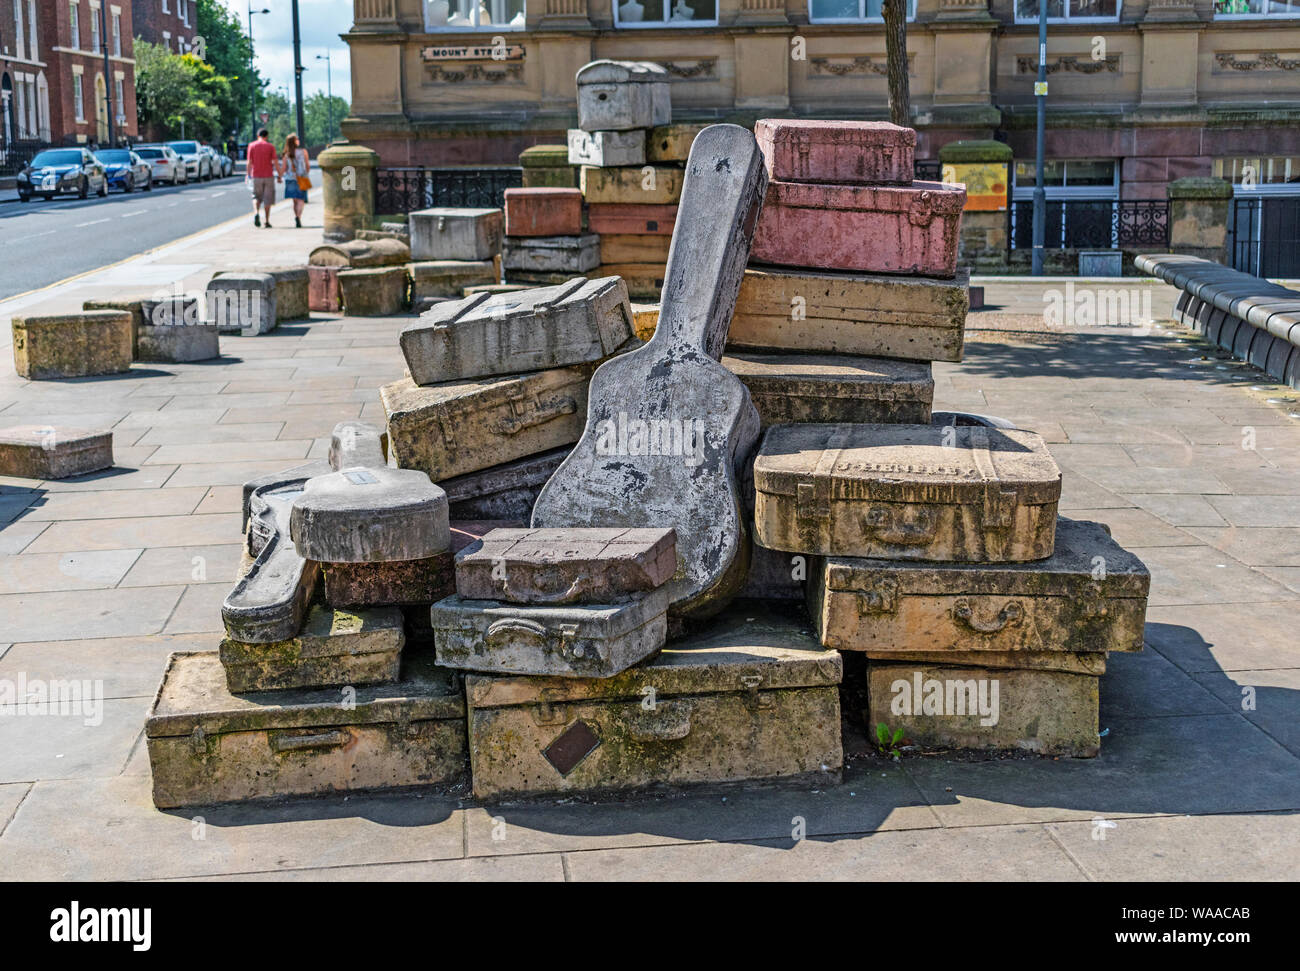 Liverpool, england, britain, uk, A case history, sculpture by John King, which draws on the history of the area, its people and institutions. Stock Photo